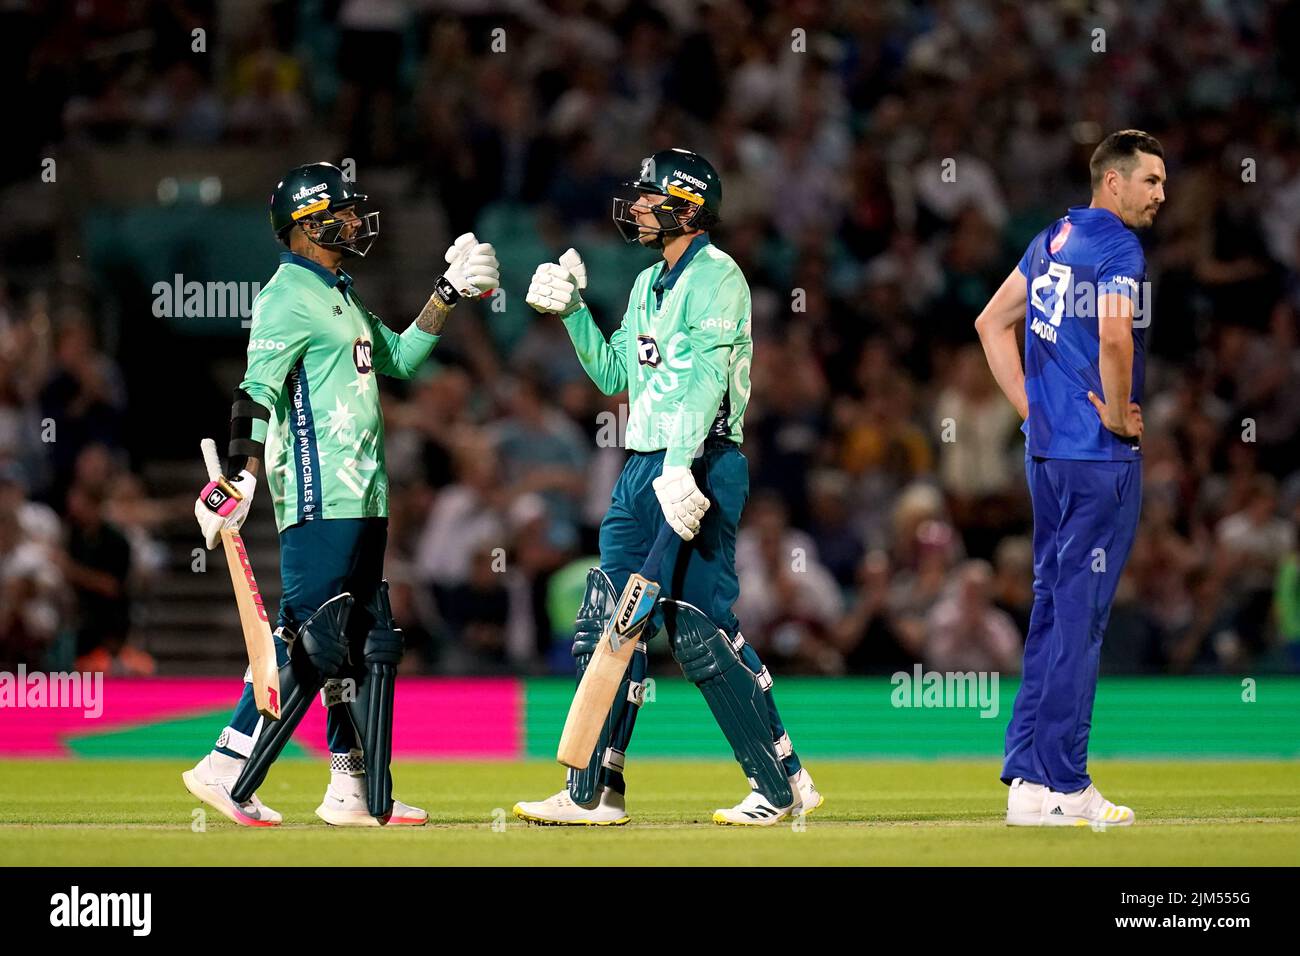 Oval Invincible's Danny Briggs, (centre) and teammate Sunil Narine, (left) as London Spirit's Chris Wood looks on during The Hundred match at The Kia Oval, London. Picture date: Thursday August 4, 2022. Stock Photo